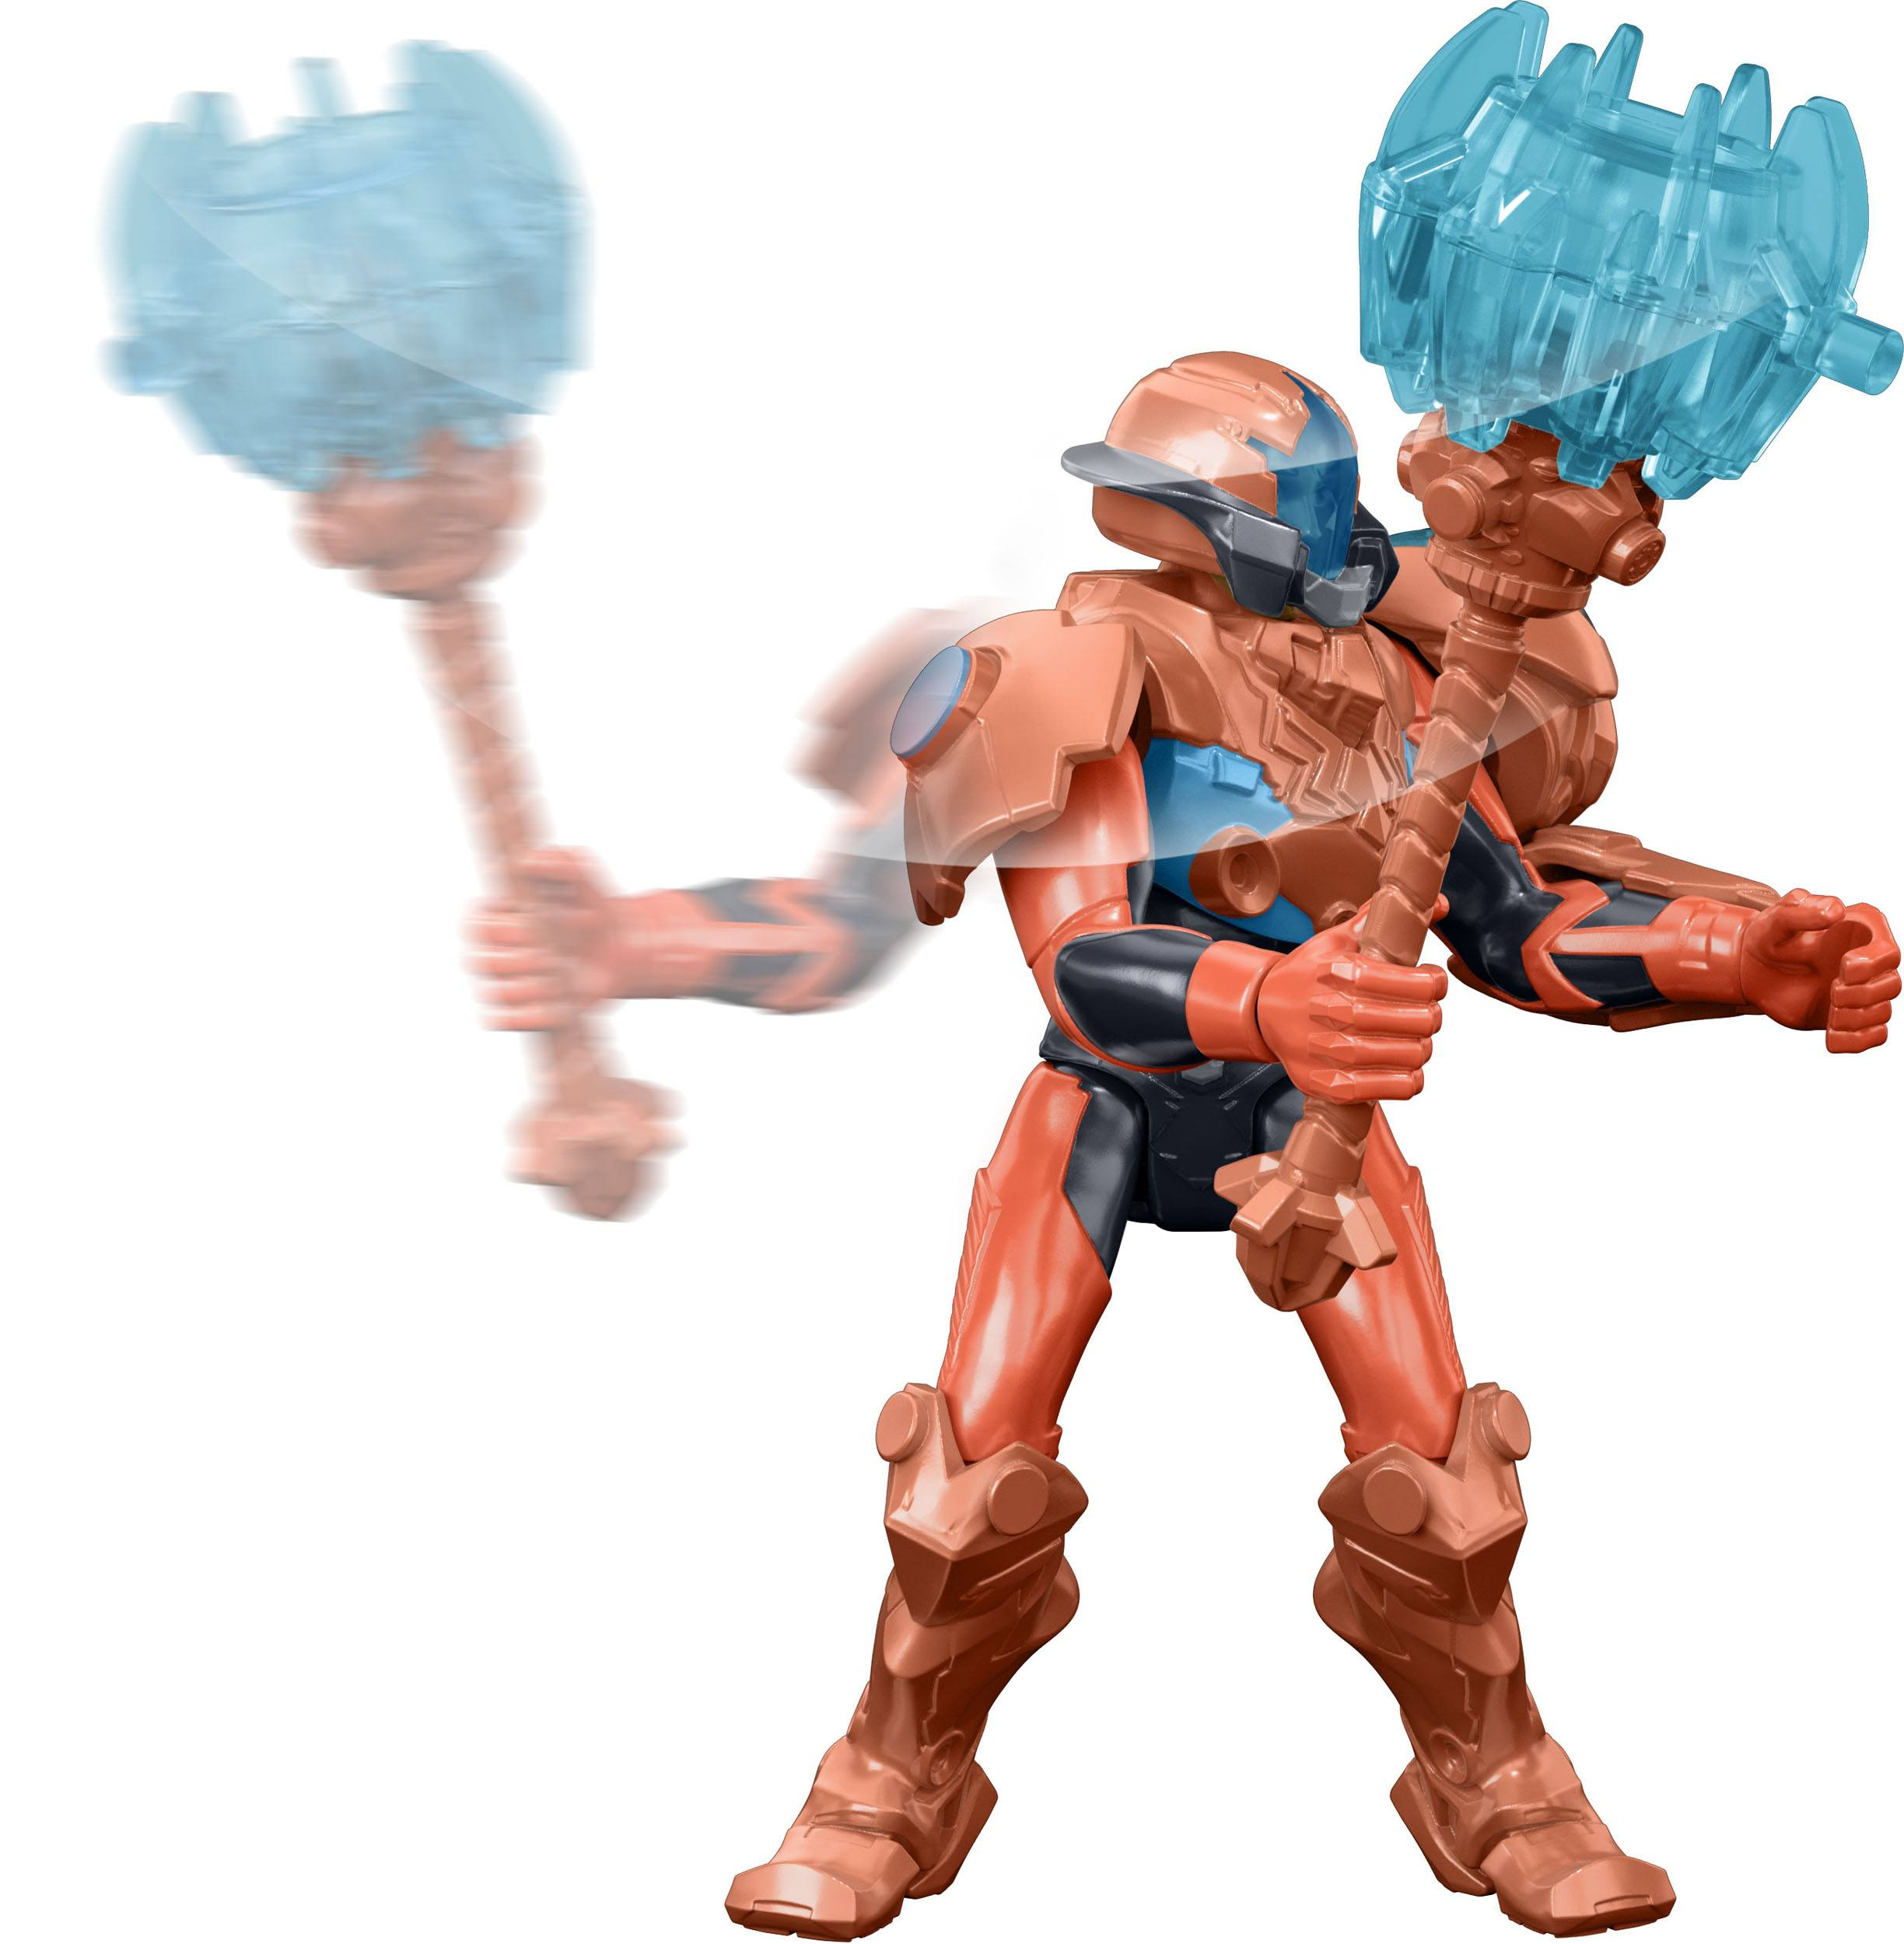 14 cm MATTEL Man-At-Arms Masters and Of Action The Universe Actionfigur The He-Man Figur: